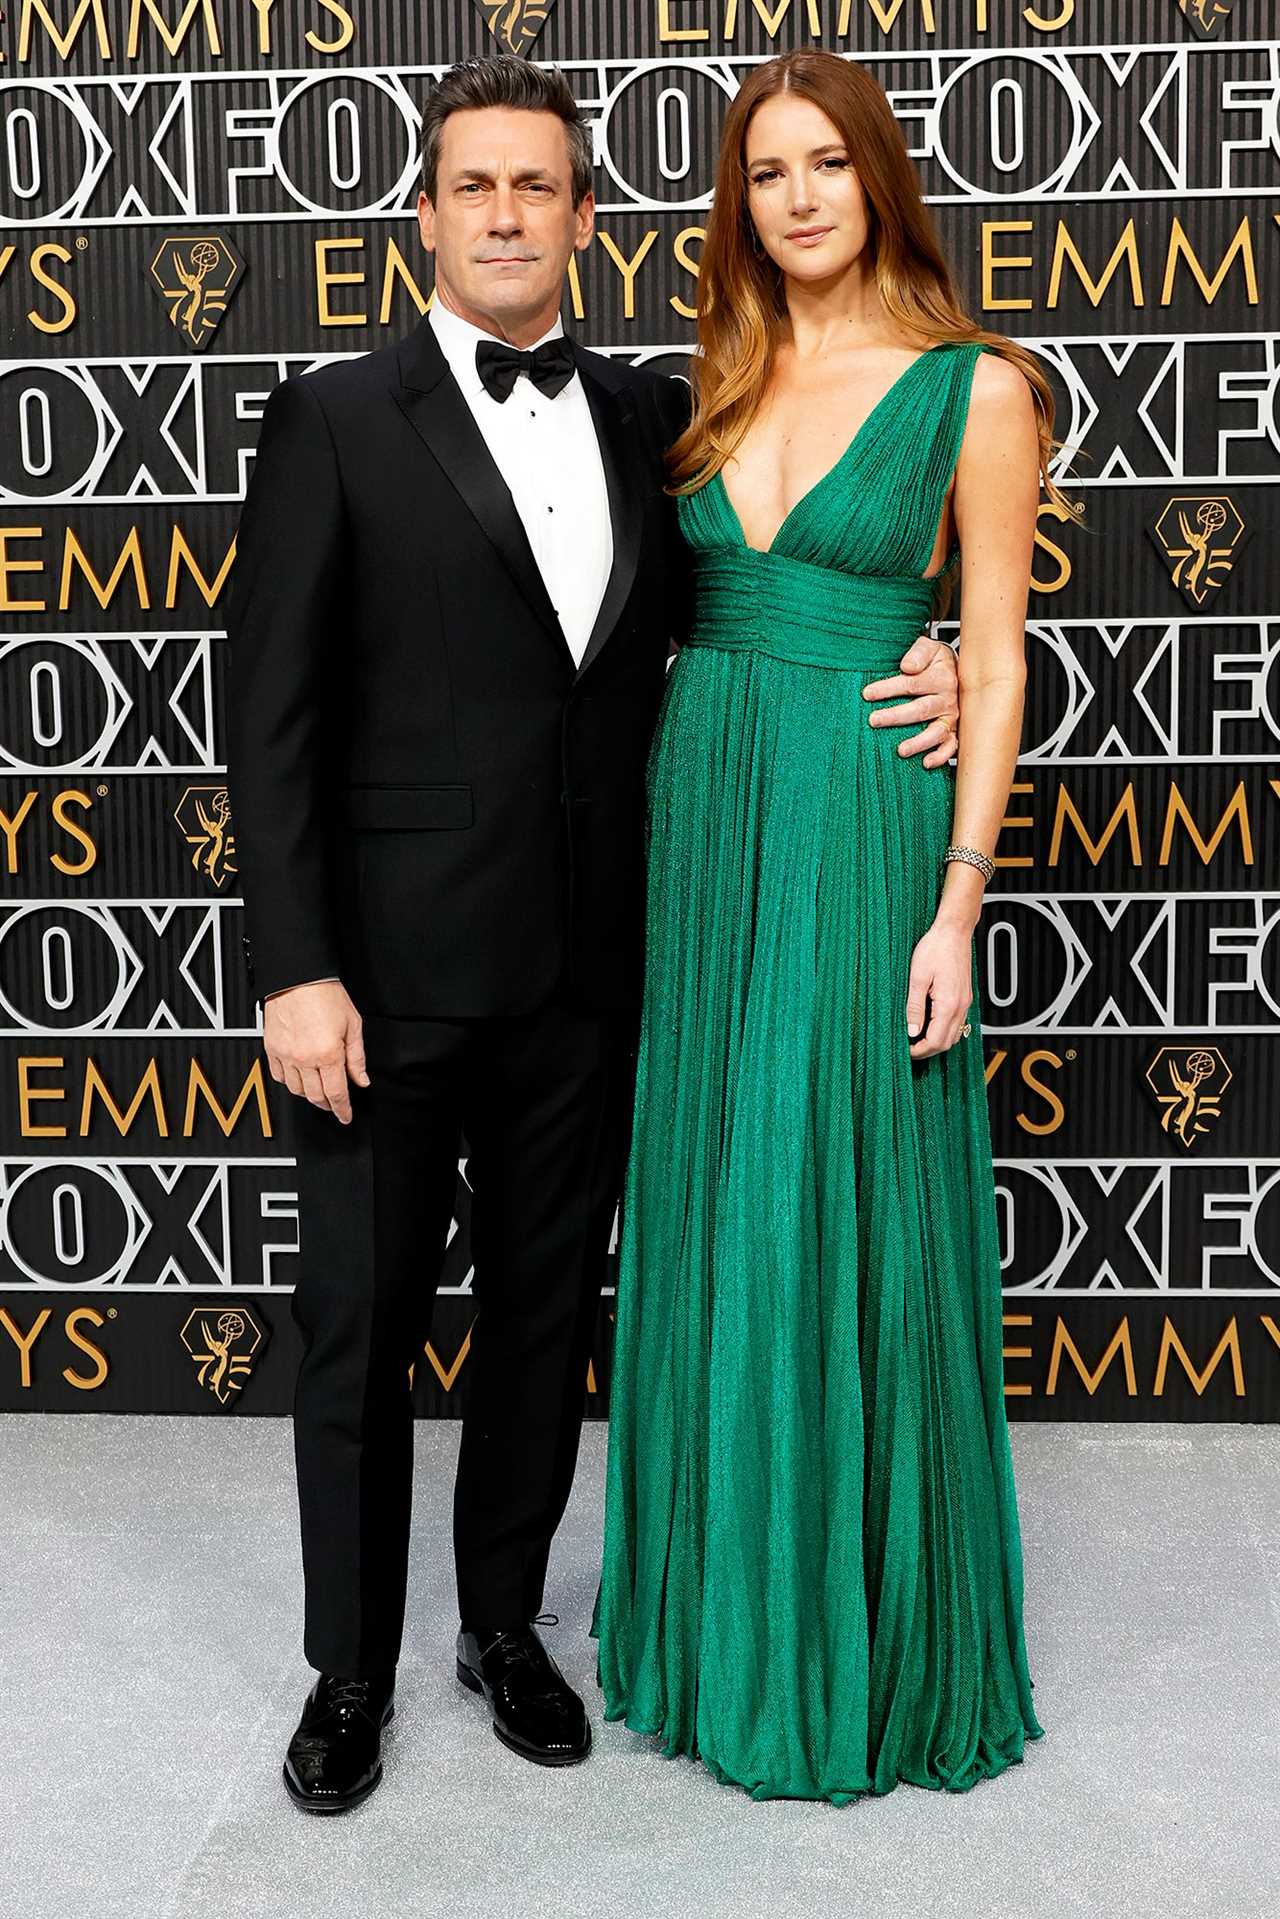 Jon Hamm and His Wife Anna Osceola Are All Loved Up at the Emmy Awards